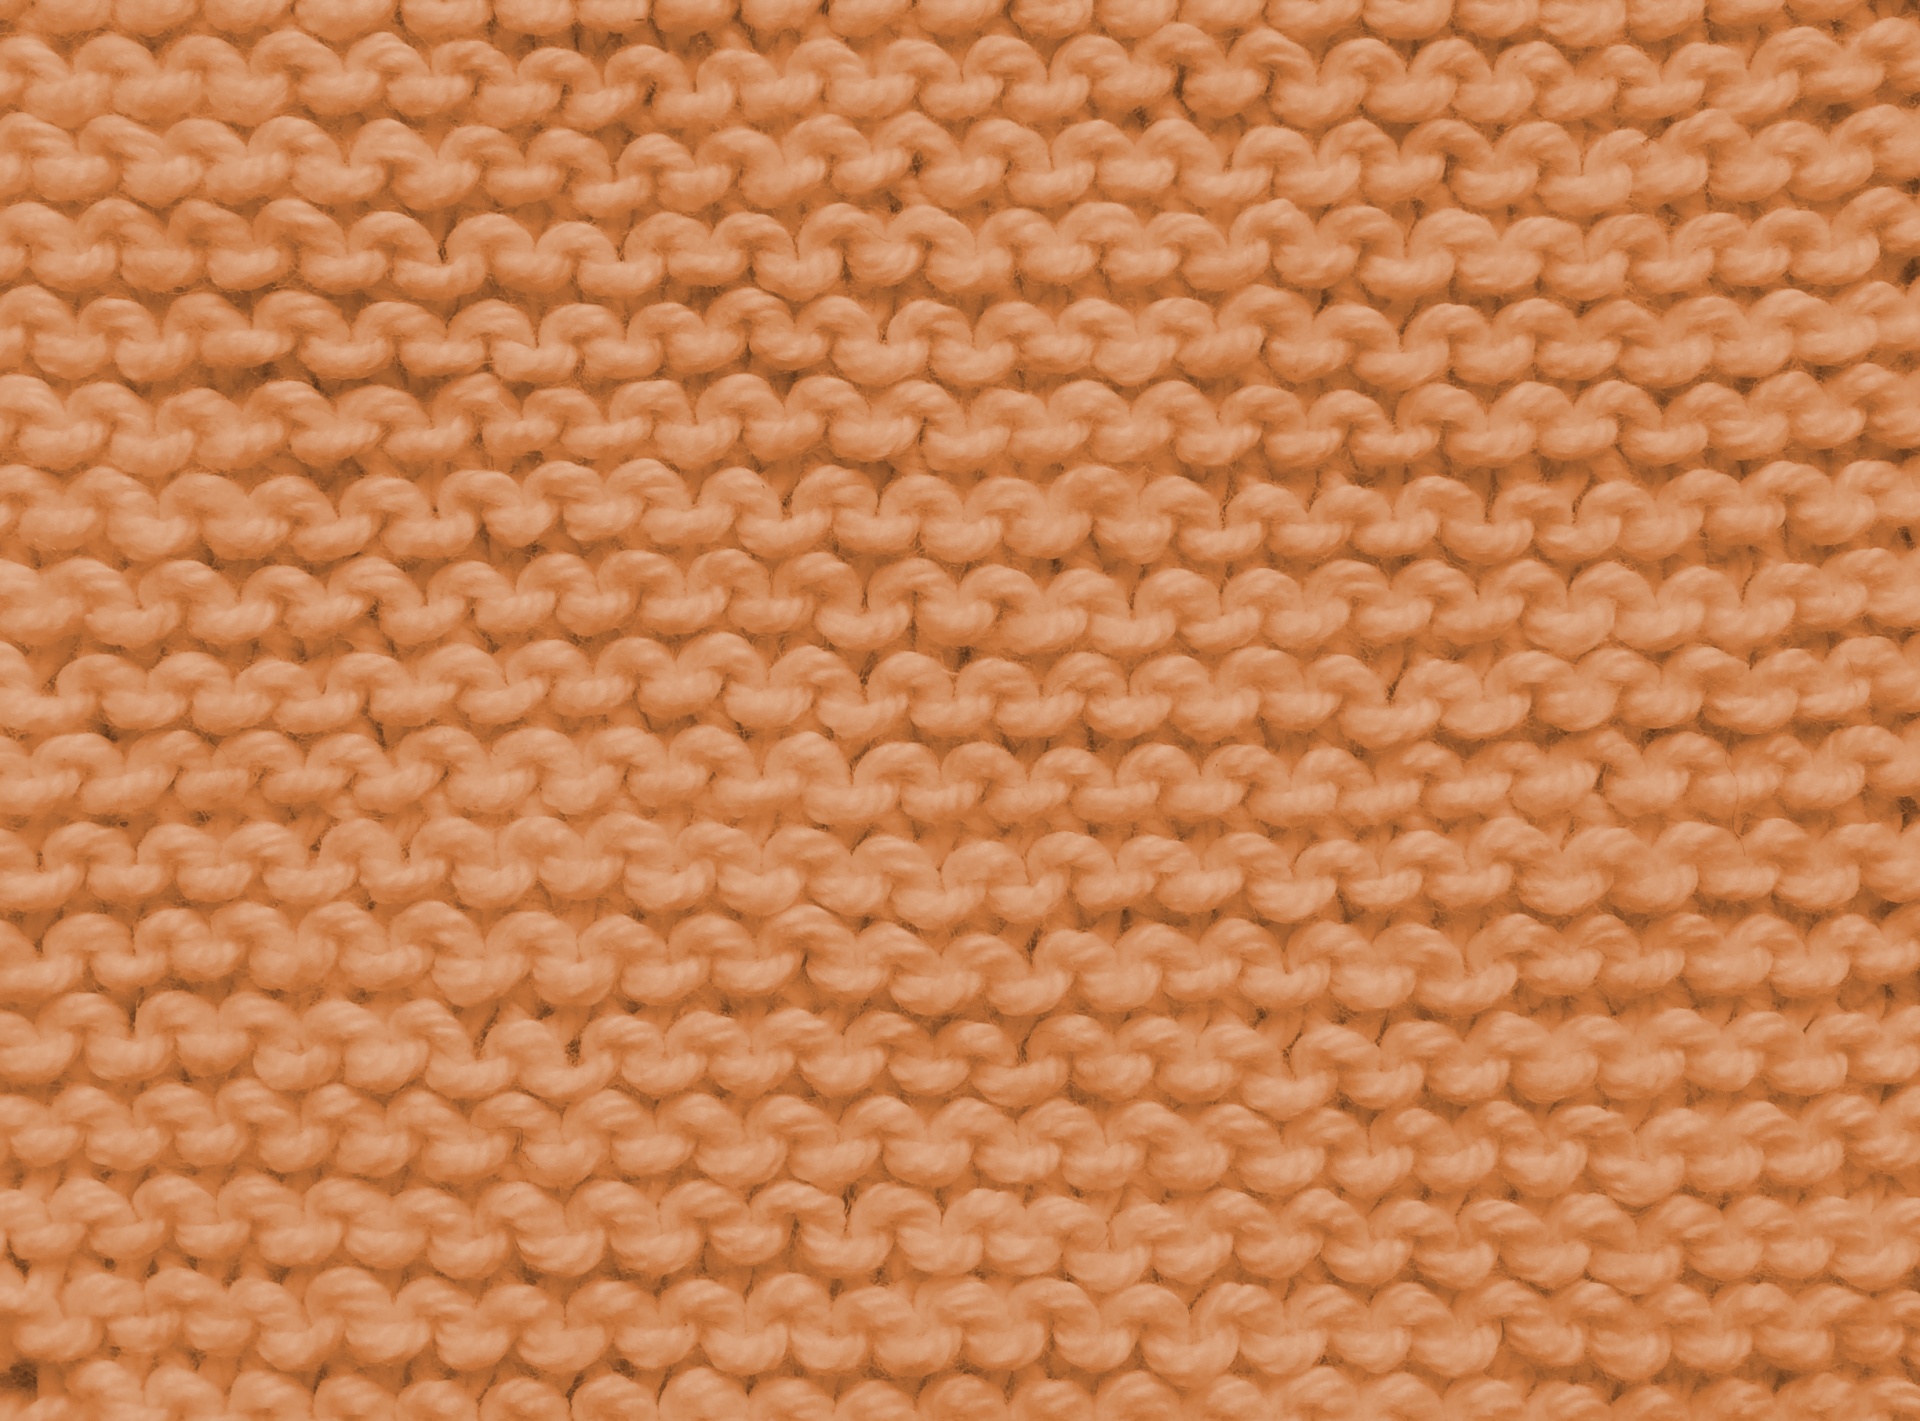 Knitting Knit Background Wallpaper Texture Free Image From